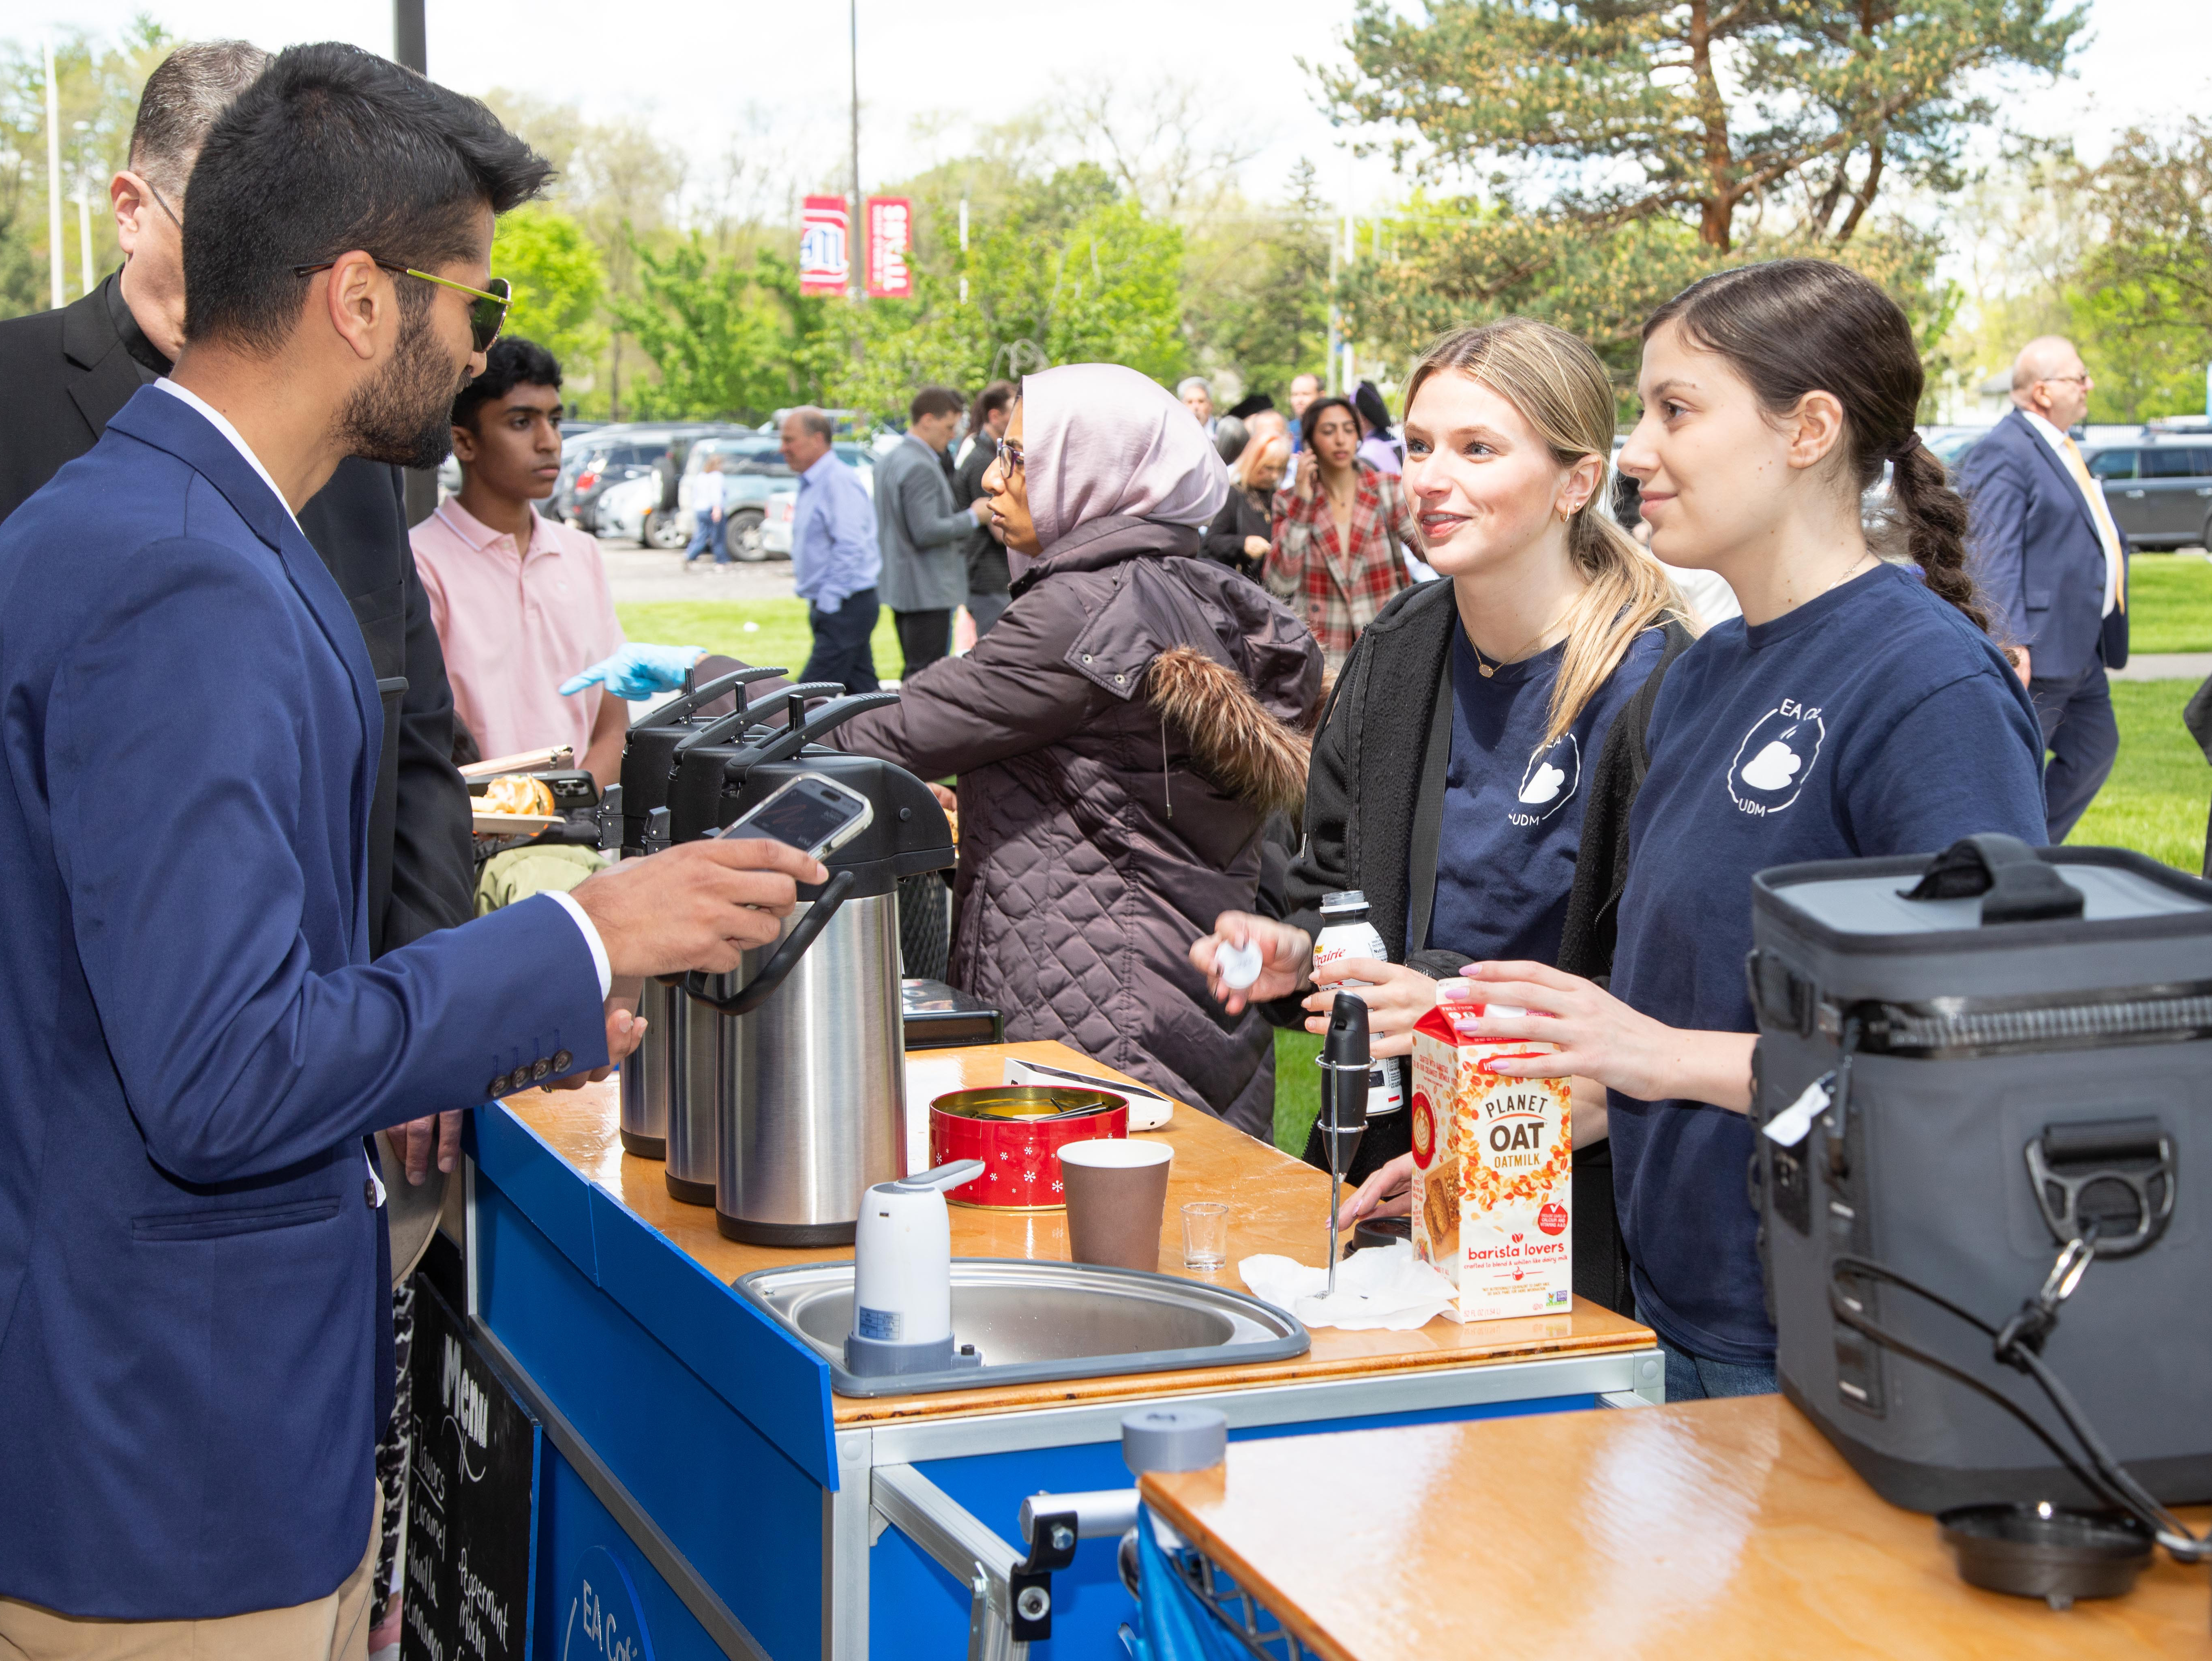 Two students stand near a coffee cart and serve to customers outdoors during commencement.